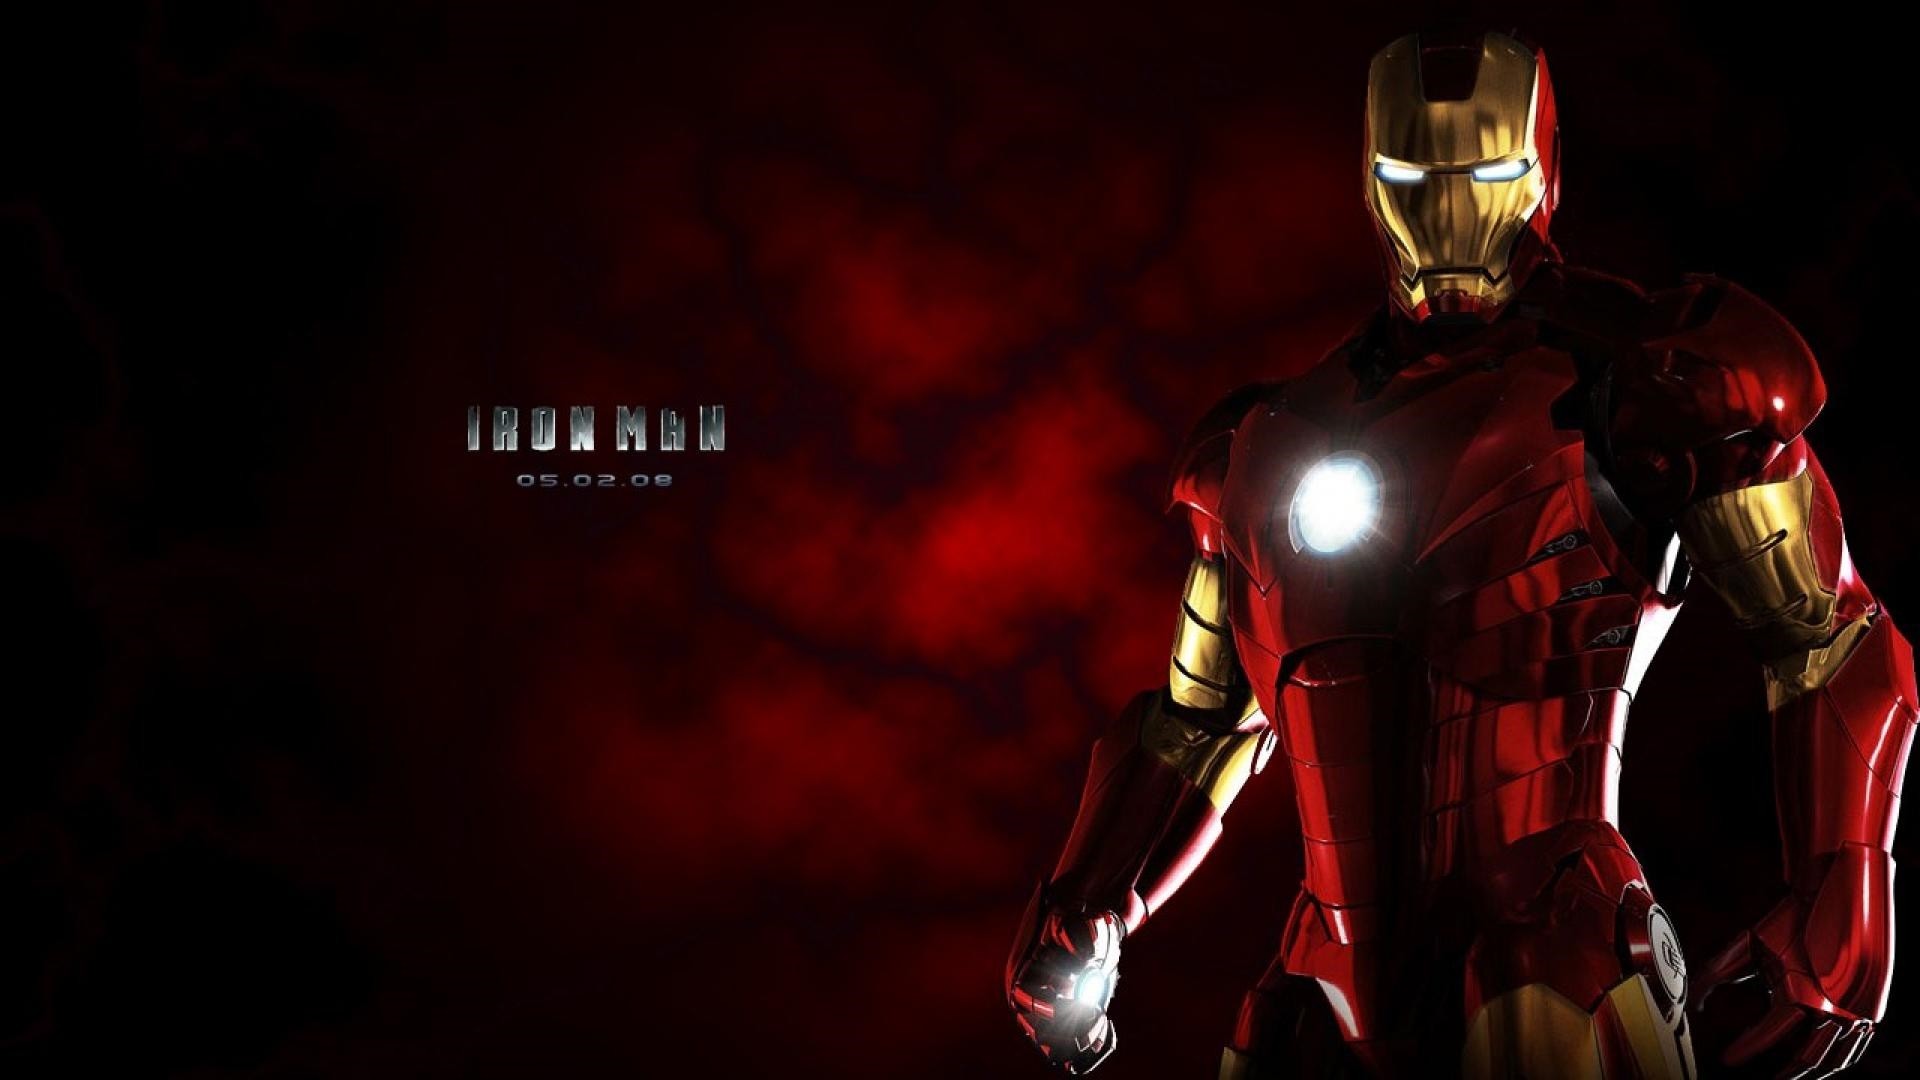 1920x1080 ... iron man full hd wallpapers on wallpaperget com ...